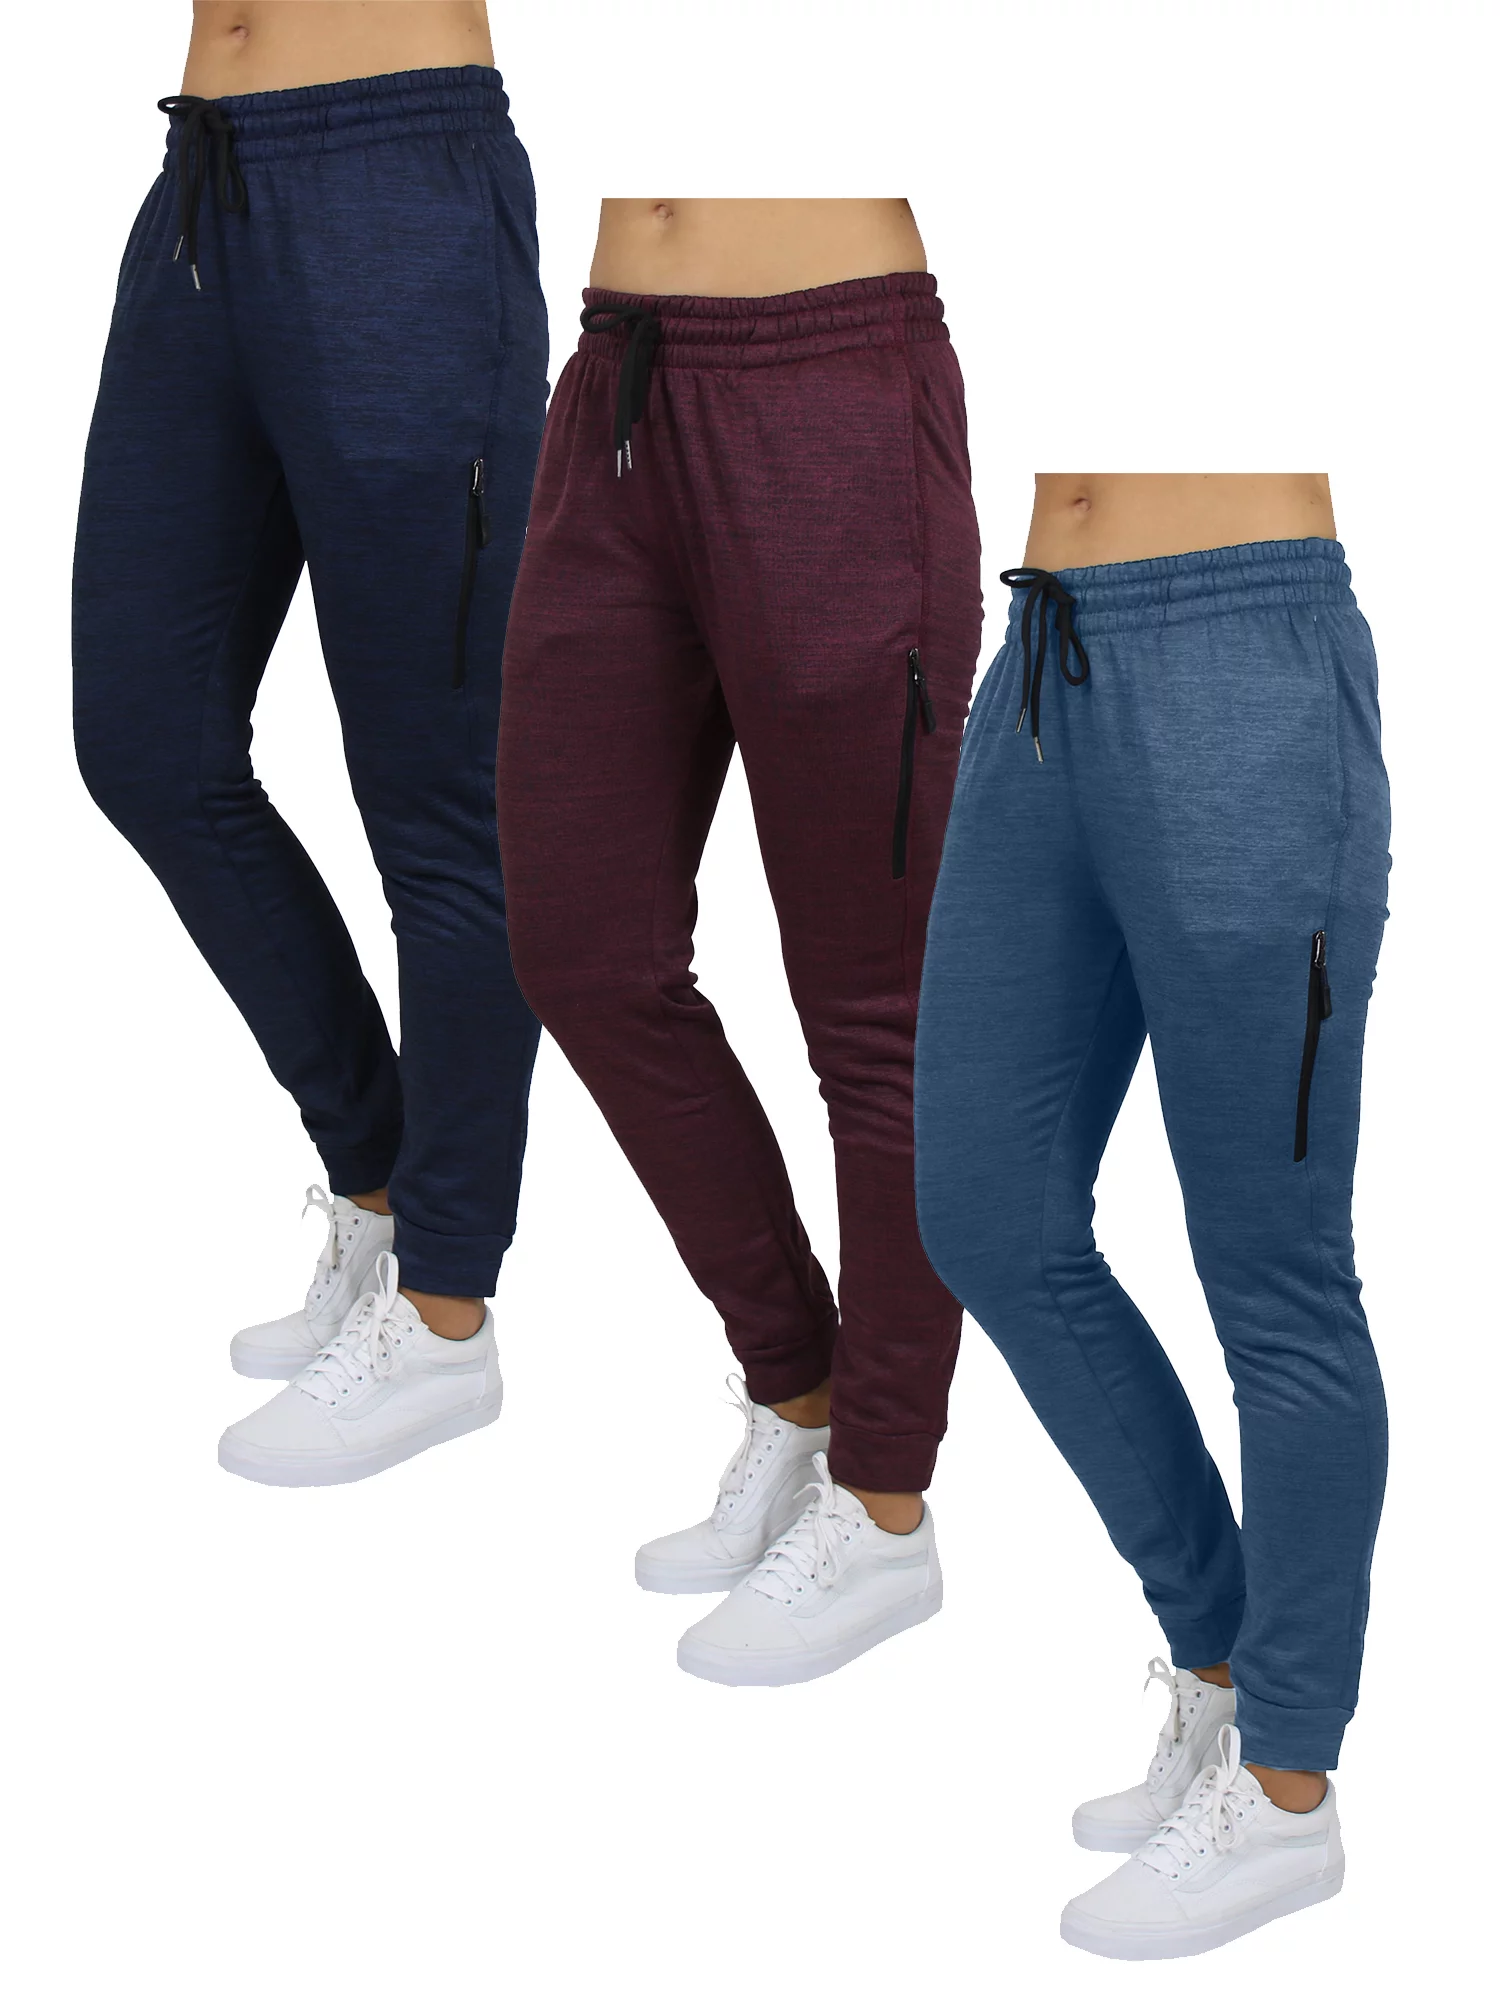 (Relaxed Fit Marled Tech) Navy & Grey & Wine